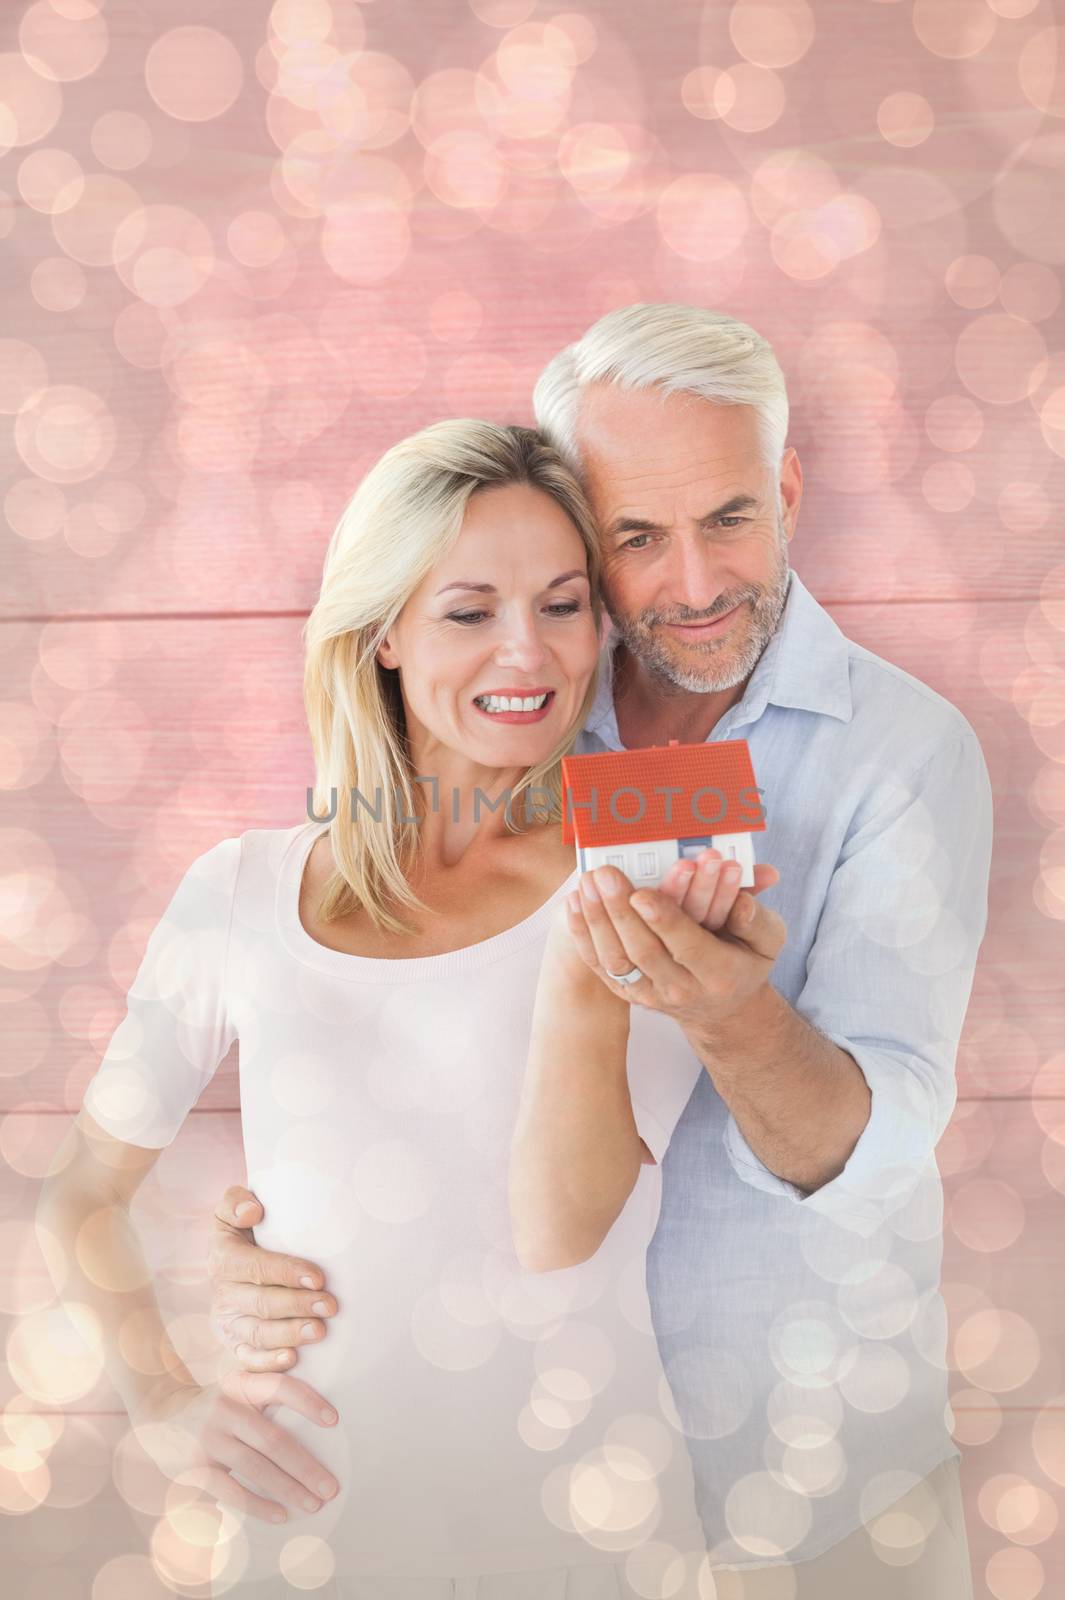 Composite image of happy couple holding miniature model house by Wavebreakmedia